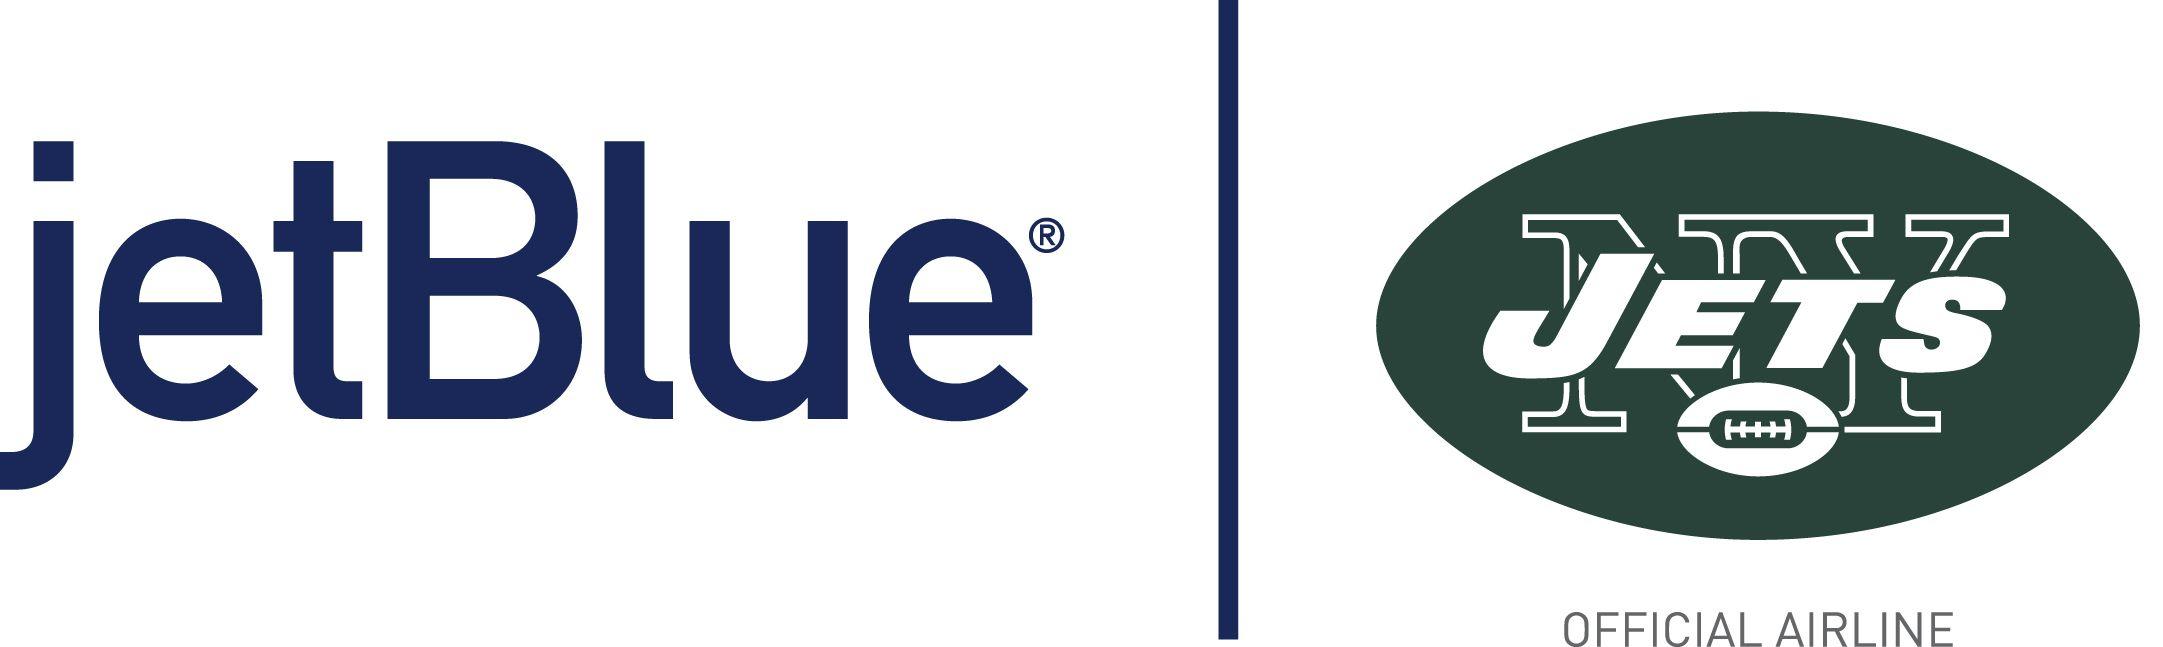 JetBlue Airlines Logo - JetBlue, New York's Hometown Airline®, Celebrates its Home Field ...